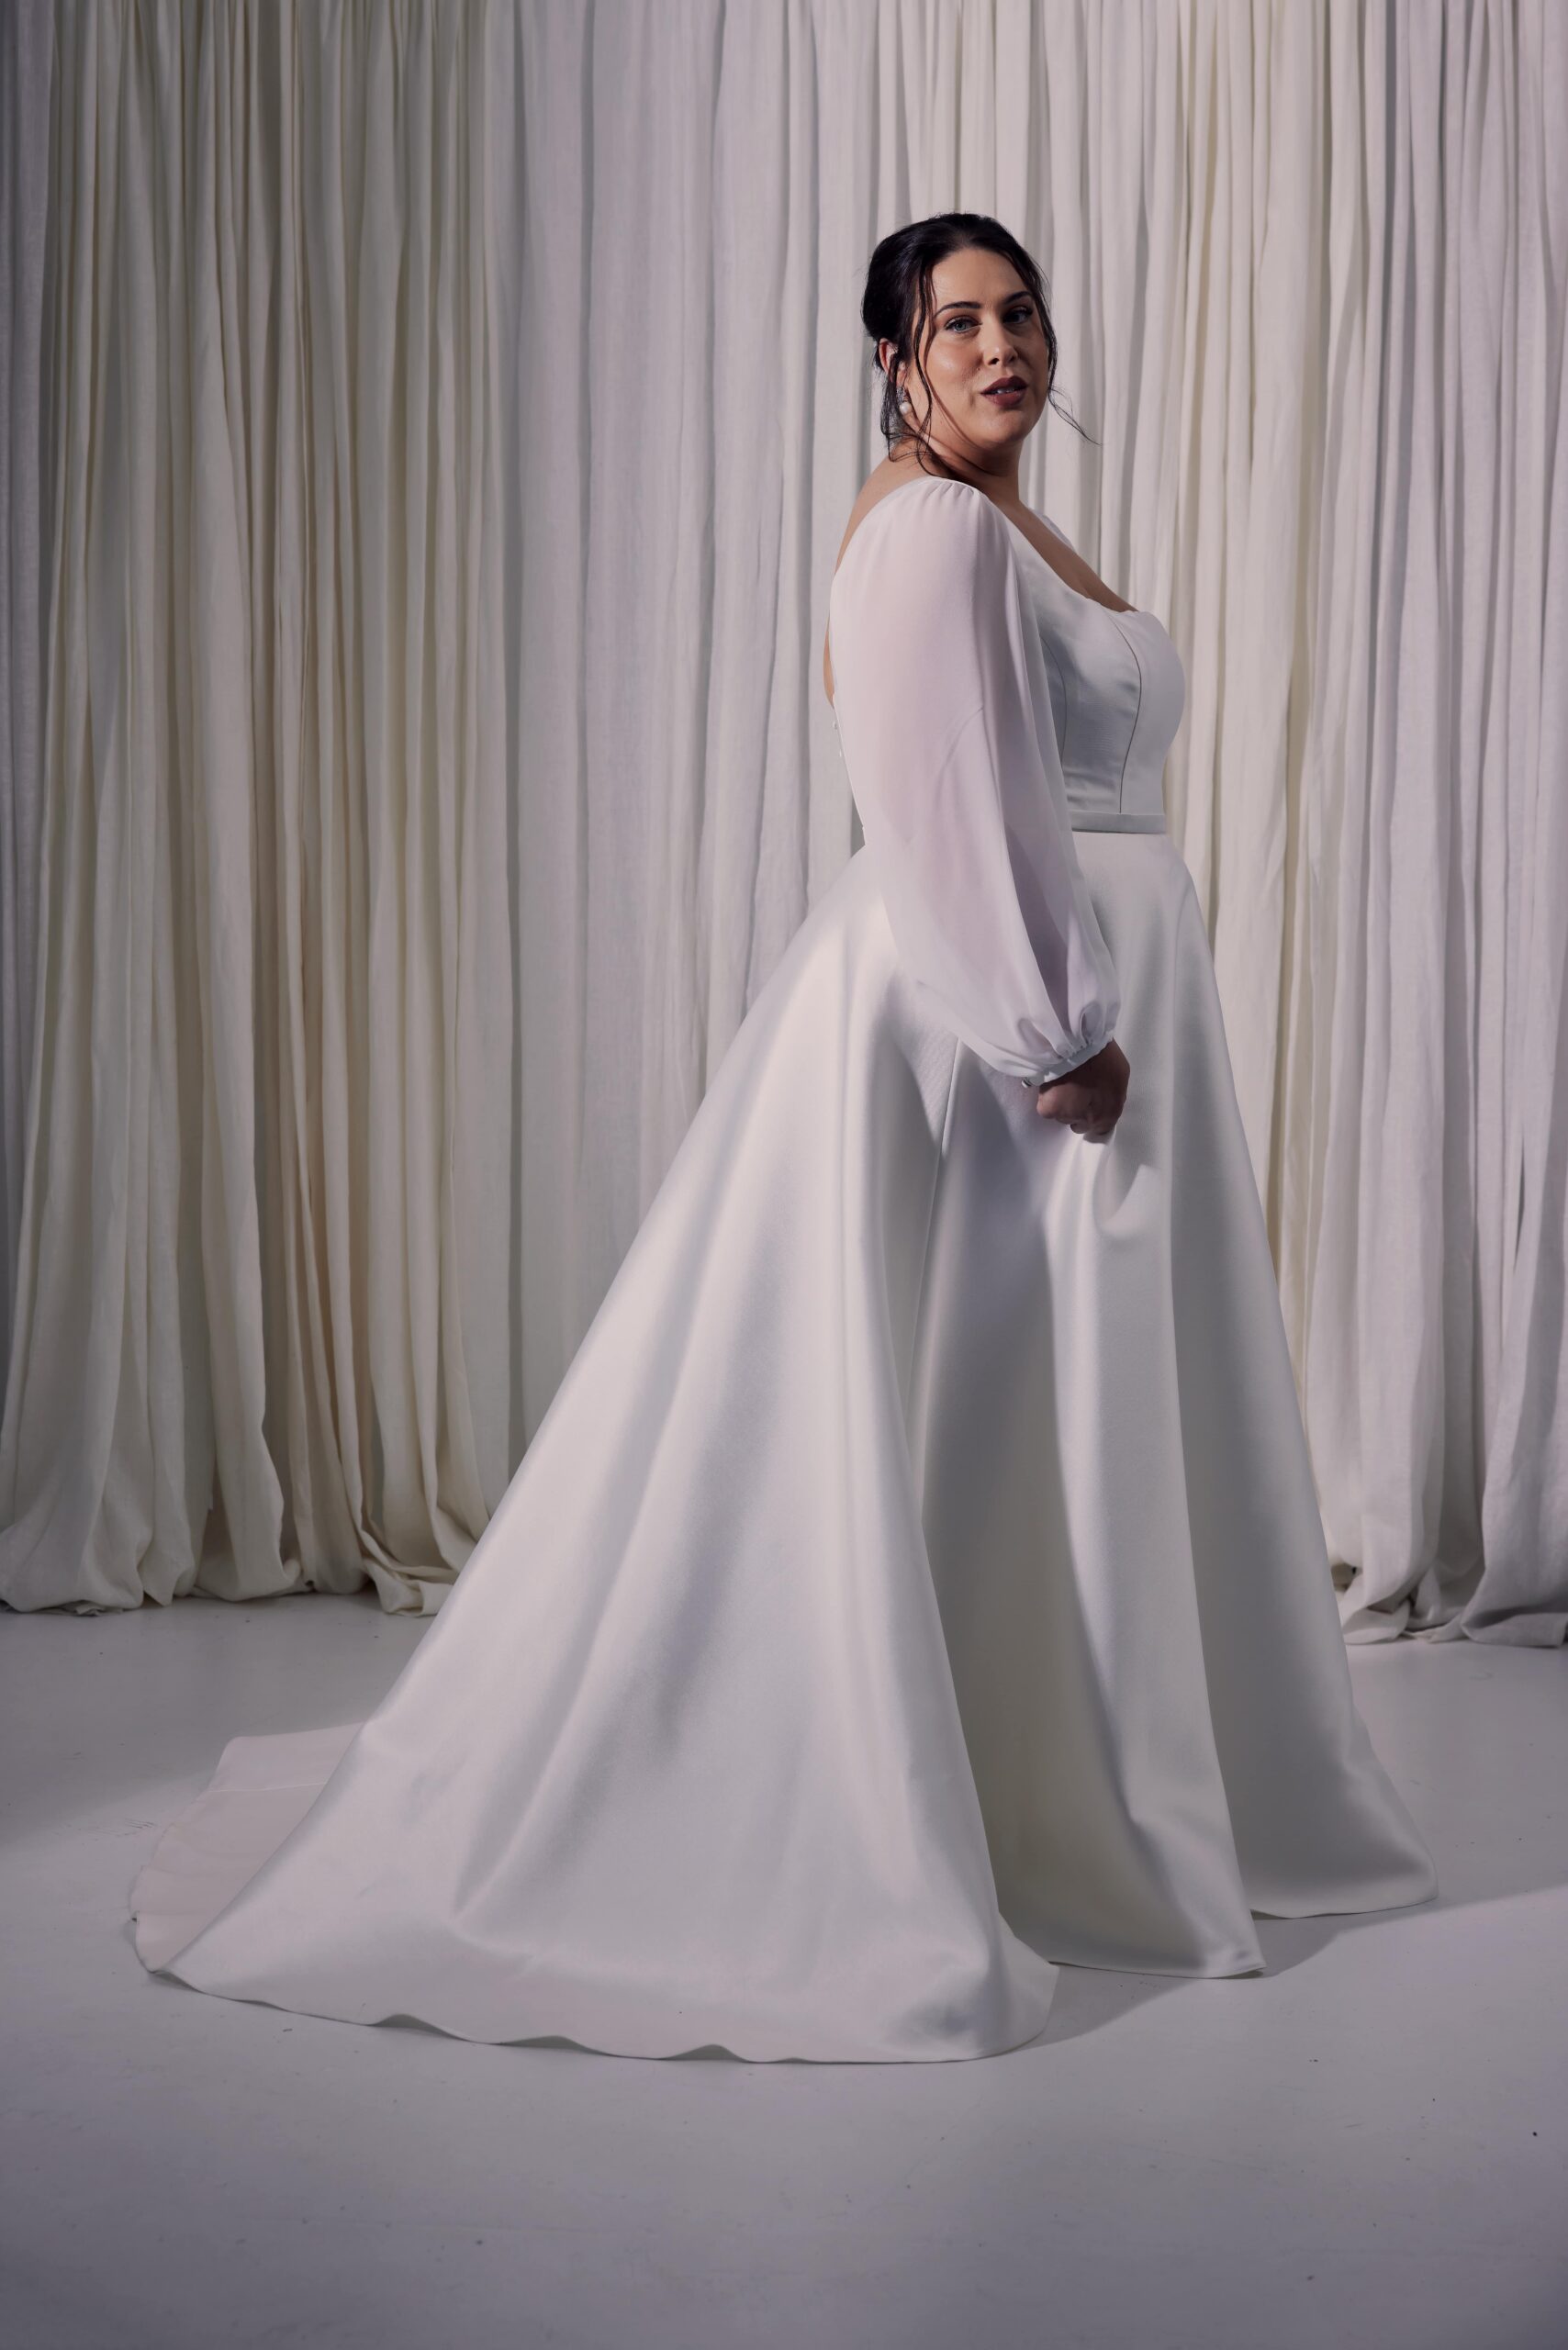 The Geneva gown - an A-line twill gown with a square neckline, soft georgette sleeves and a full skirt.